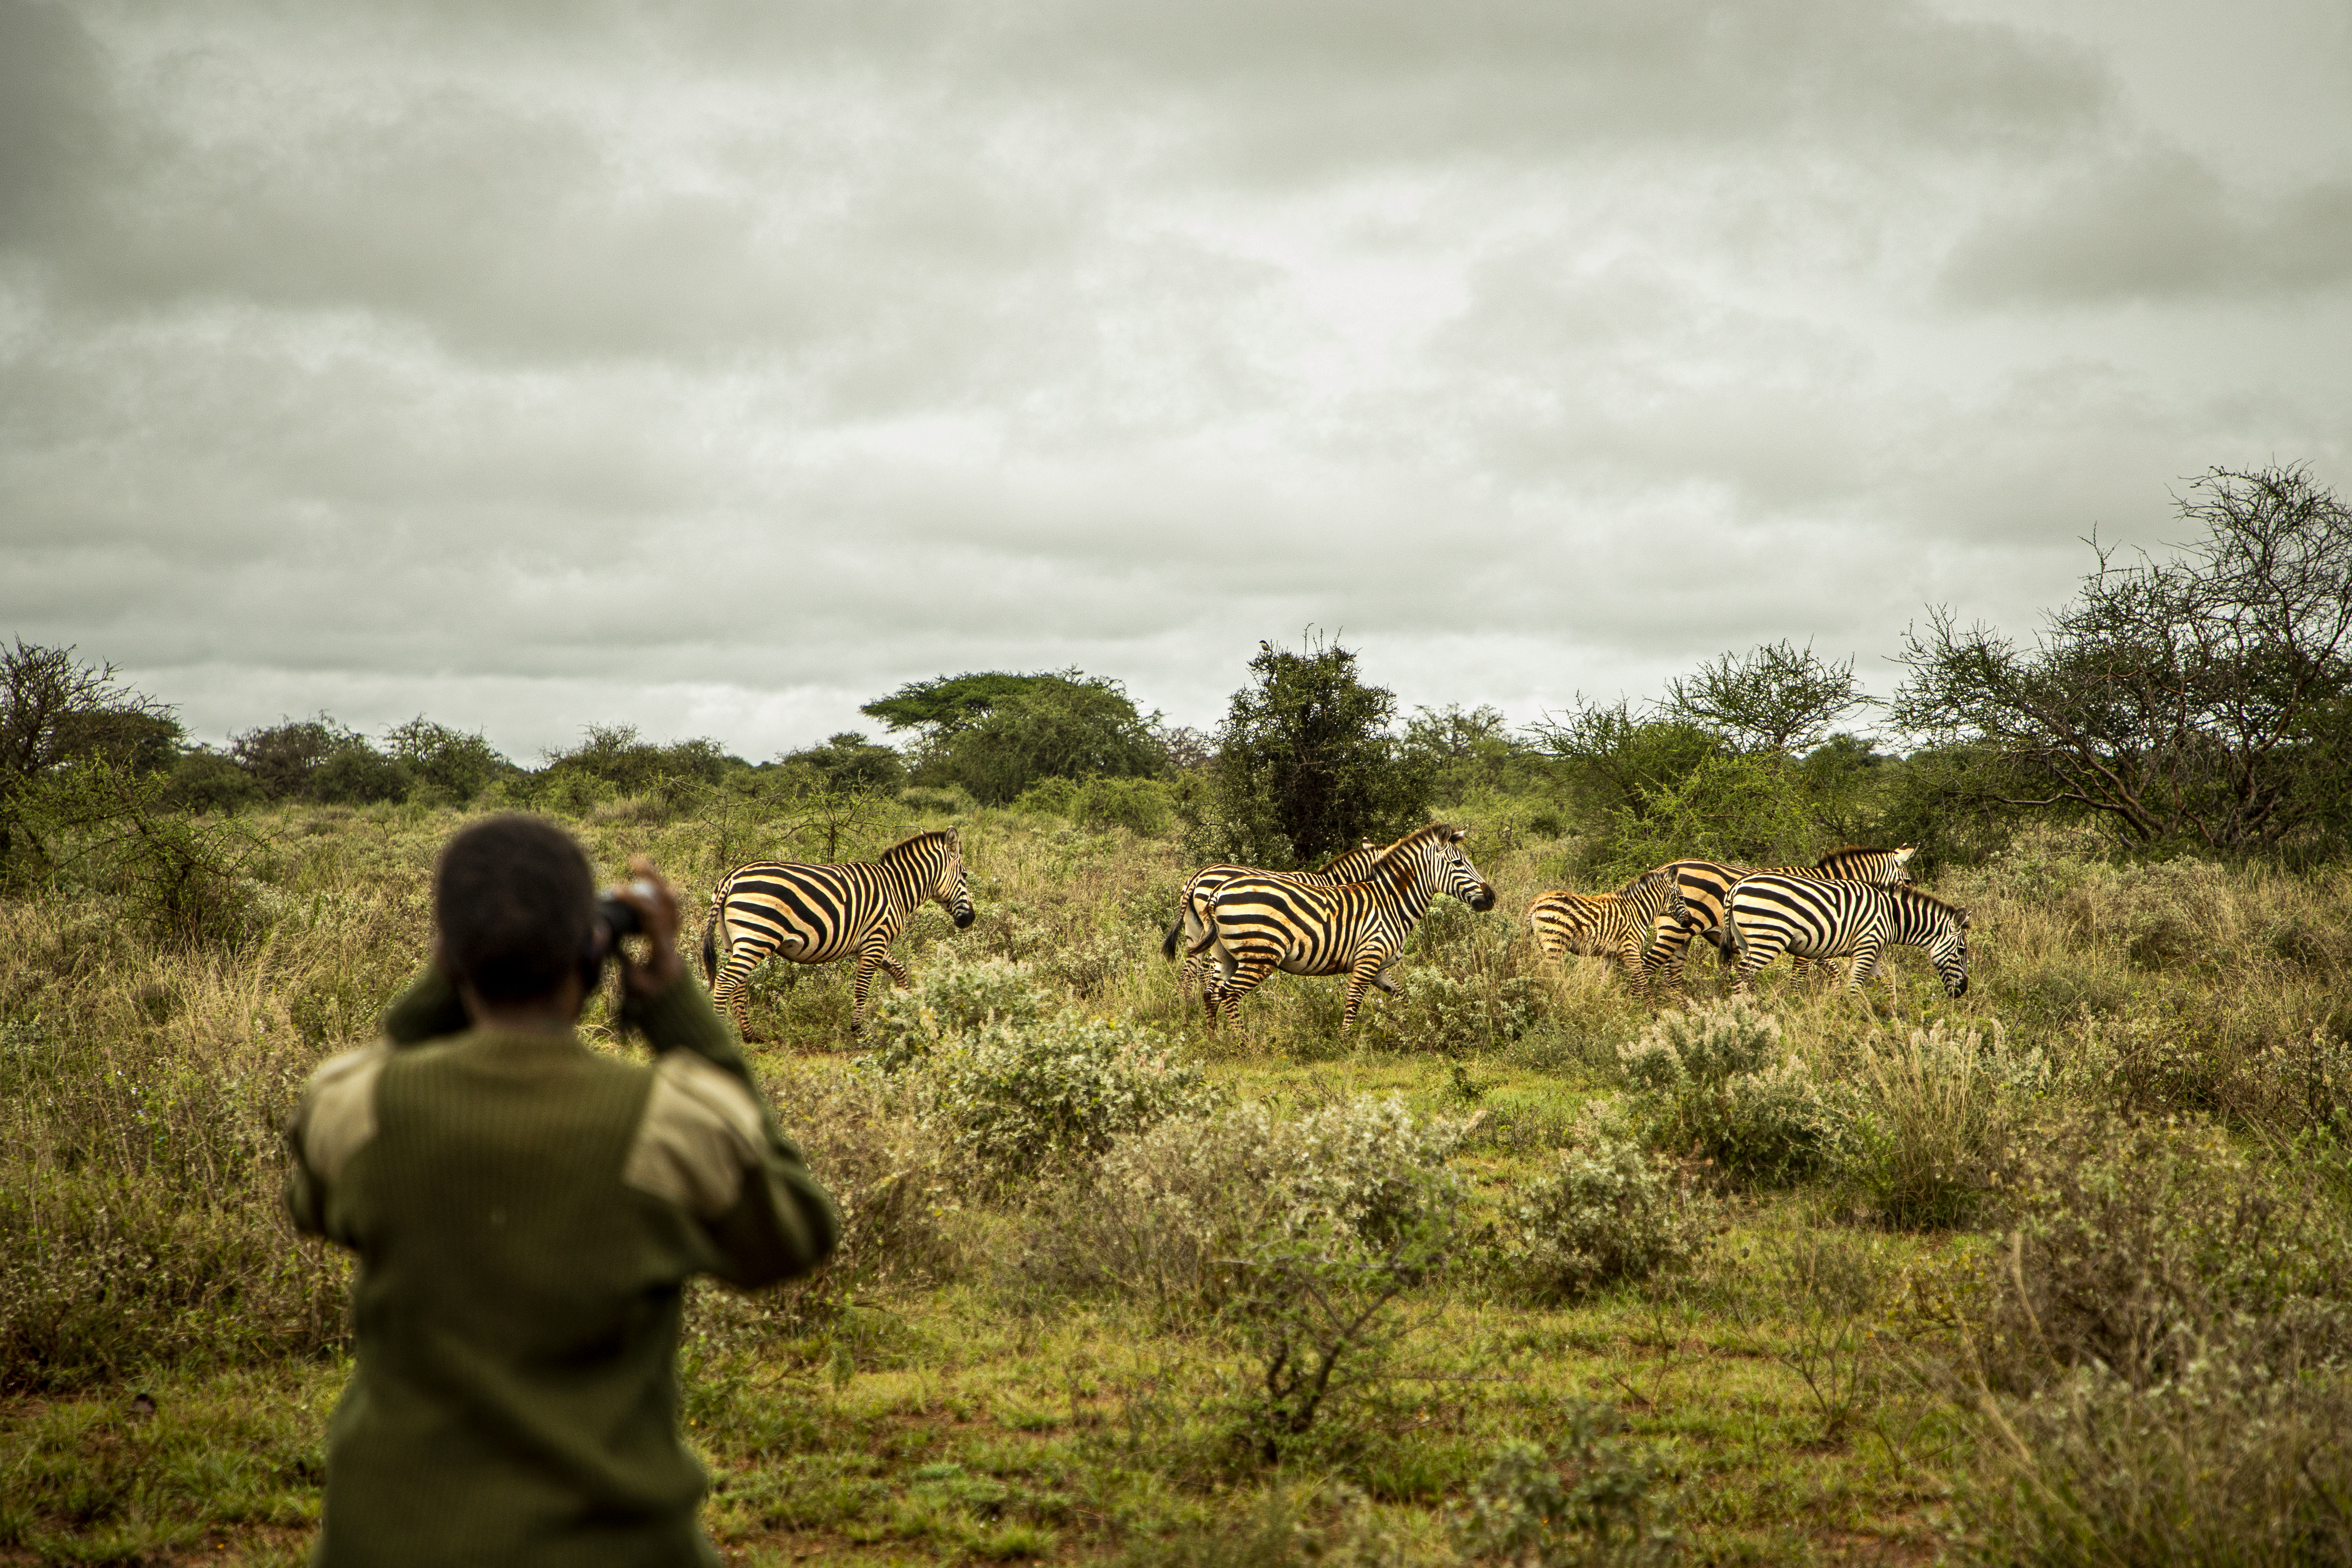 Community ranger Ruth Sikeita conducts a daily wildlife patrol in Kenya (IFAW/Will Swanson/PA)